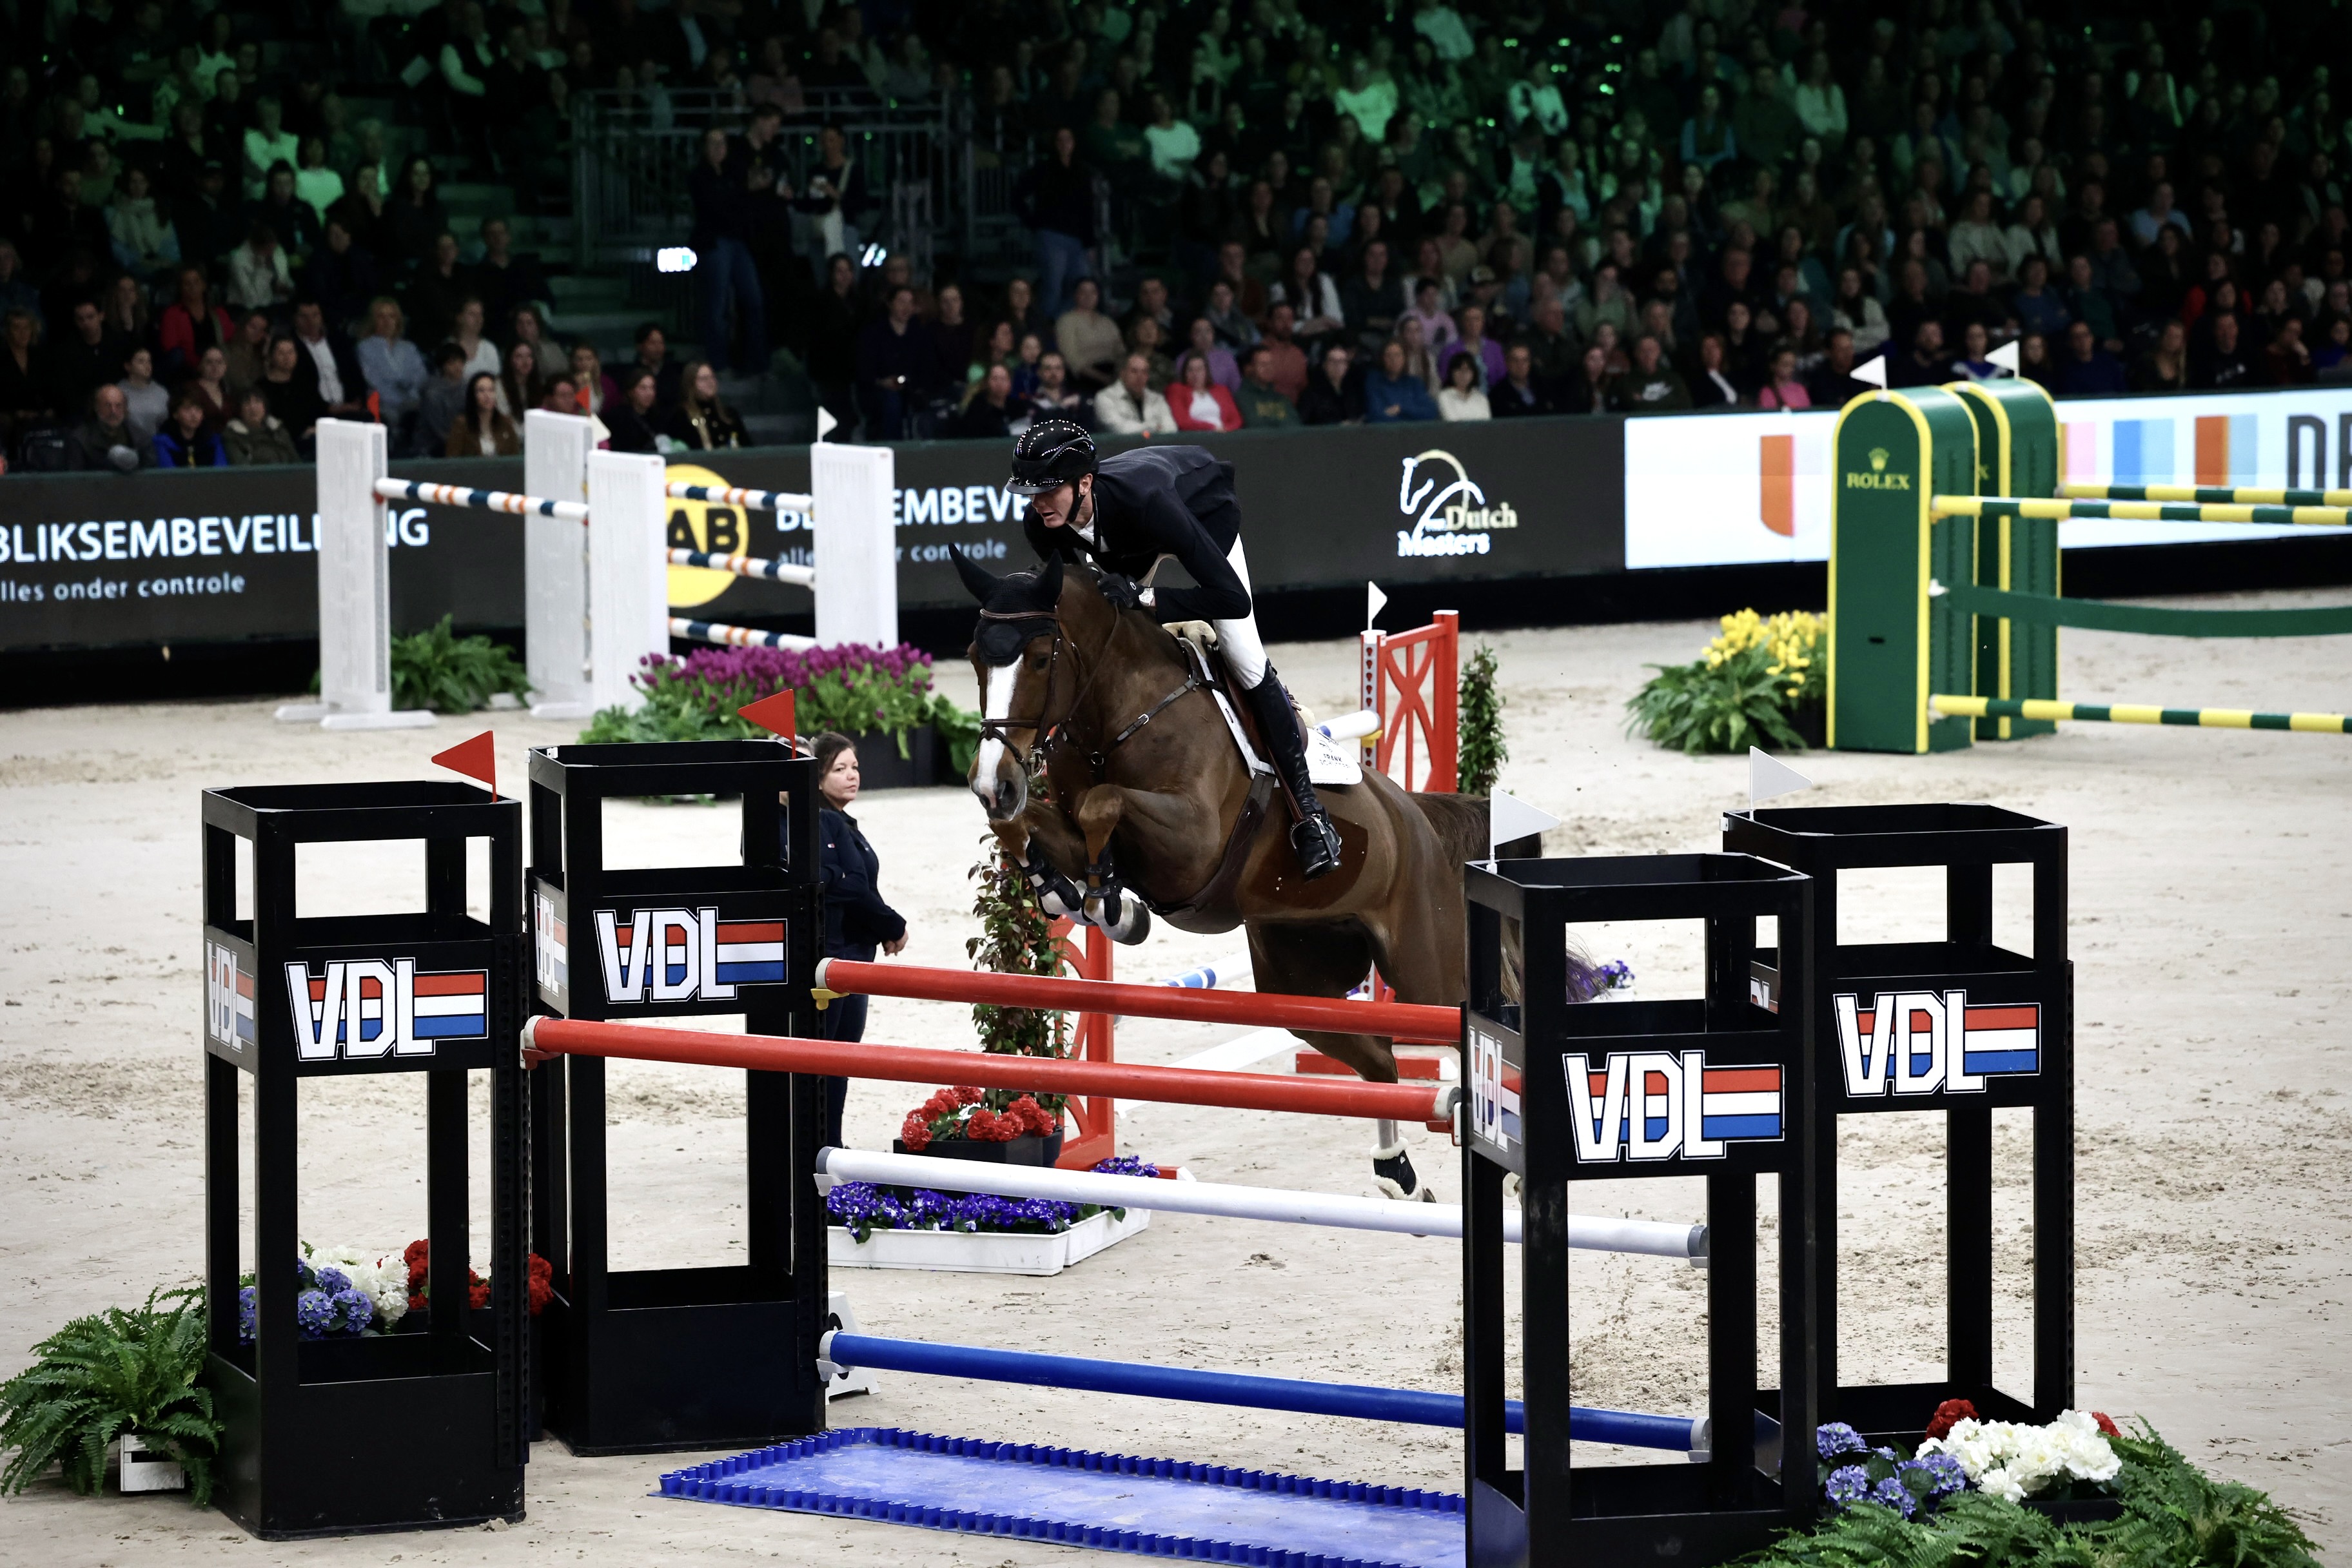 Frank Schuttert and Pieter Clemens share first prize in CSI5* 1.45m Borek Prize at Dutch Masters